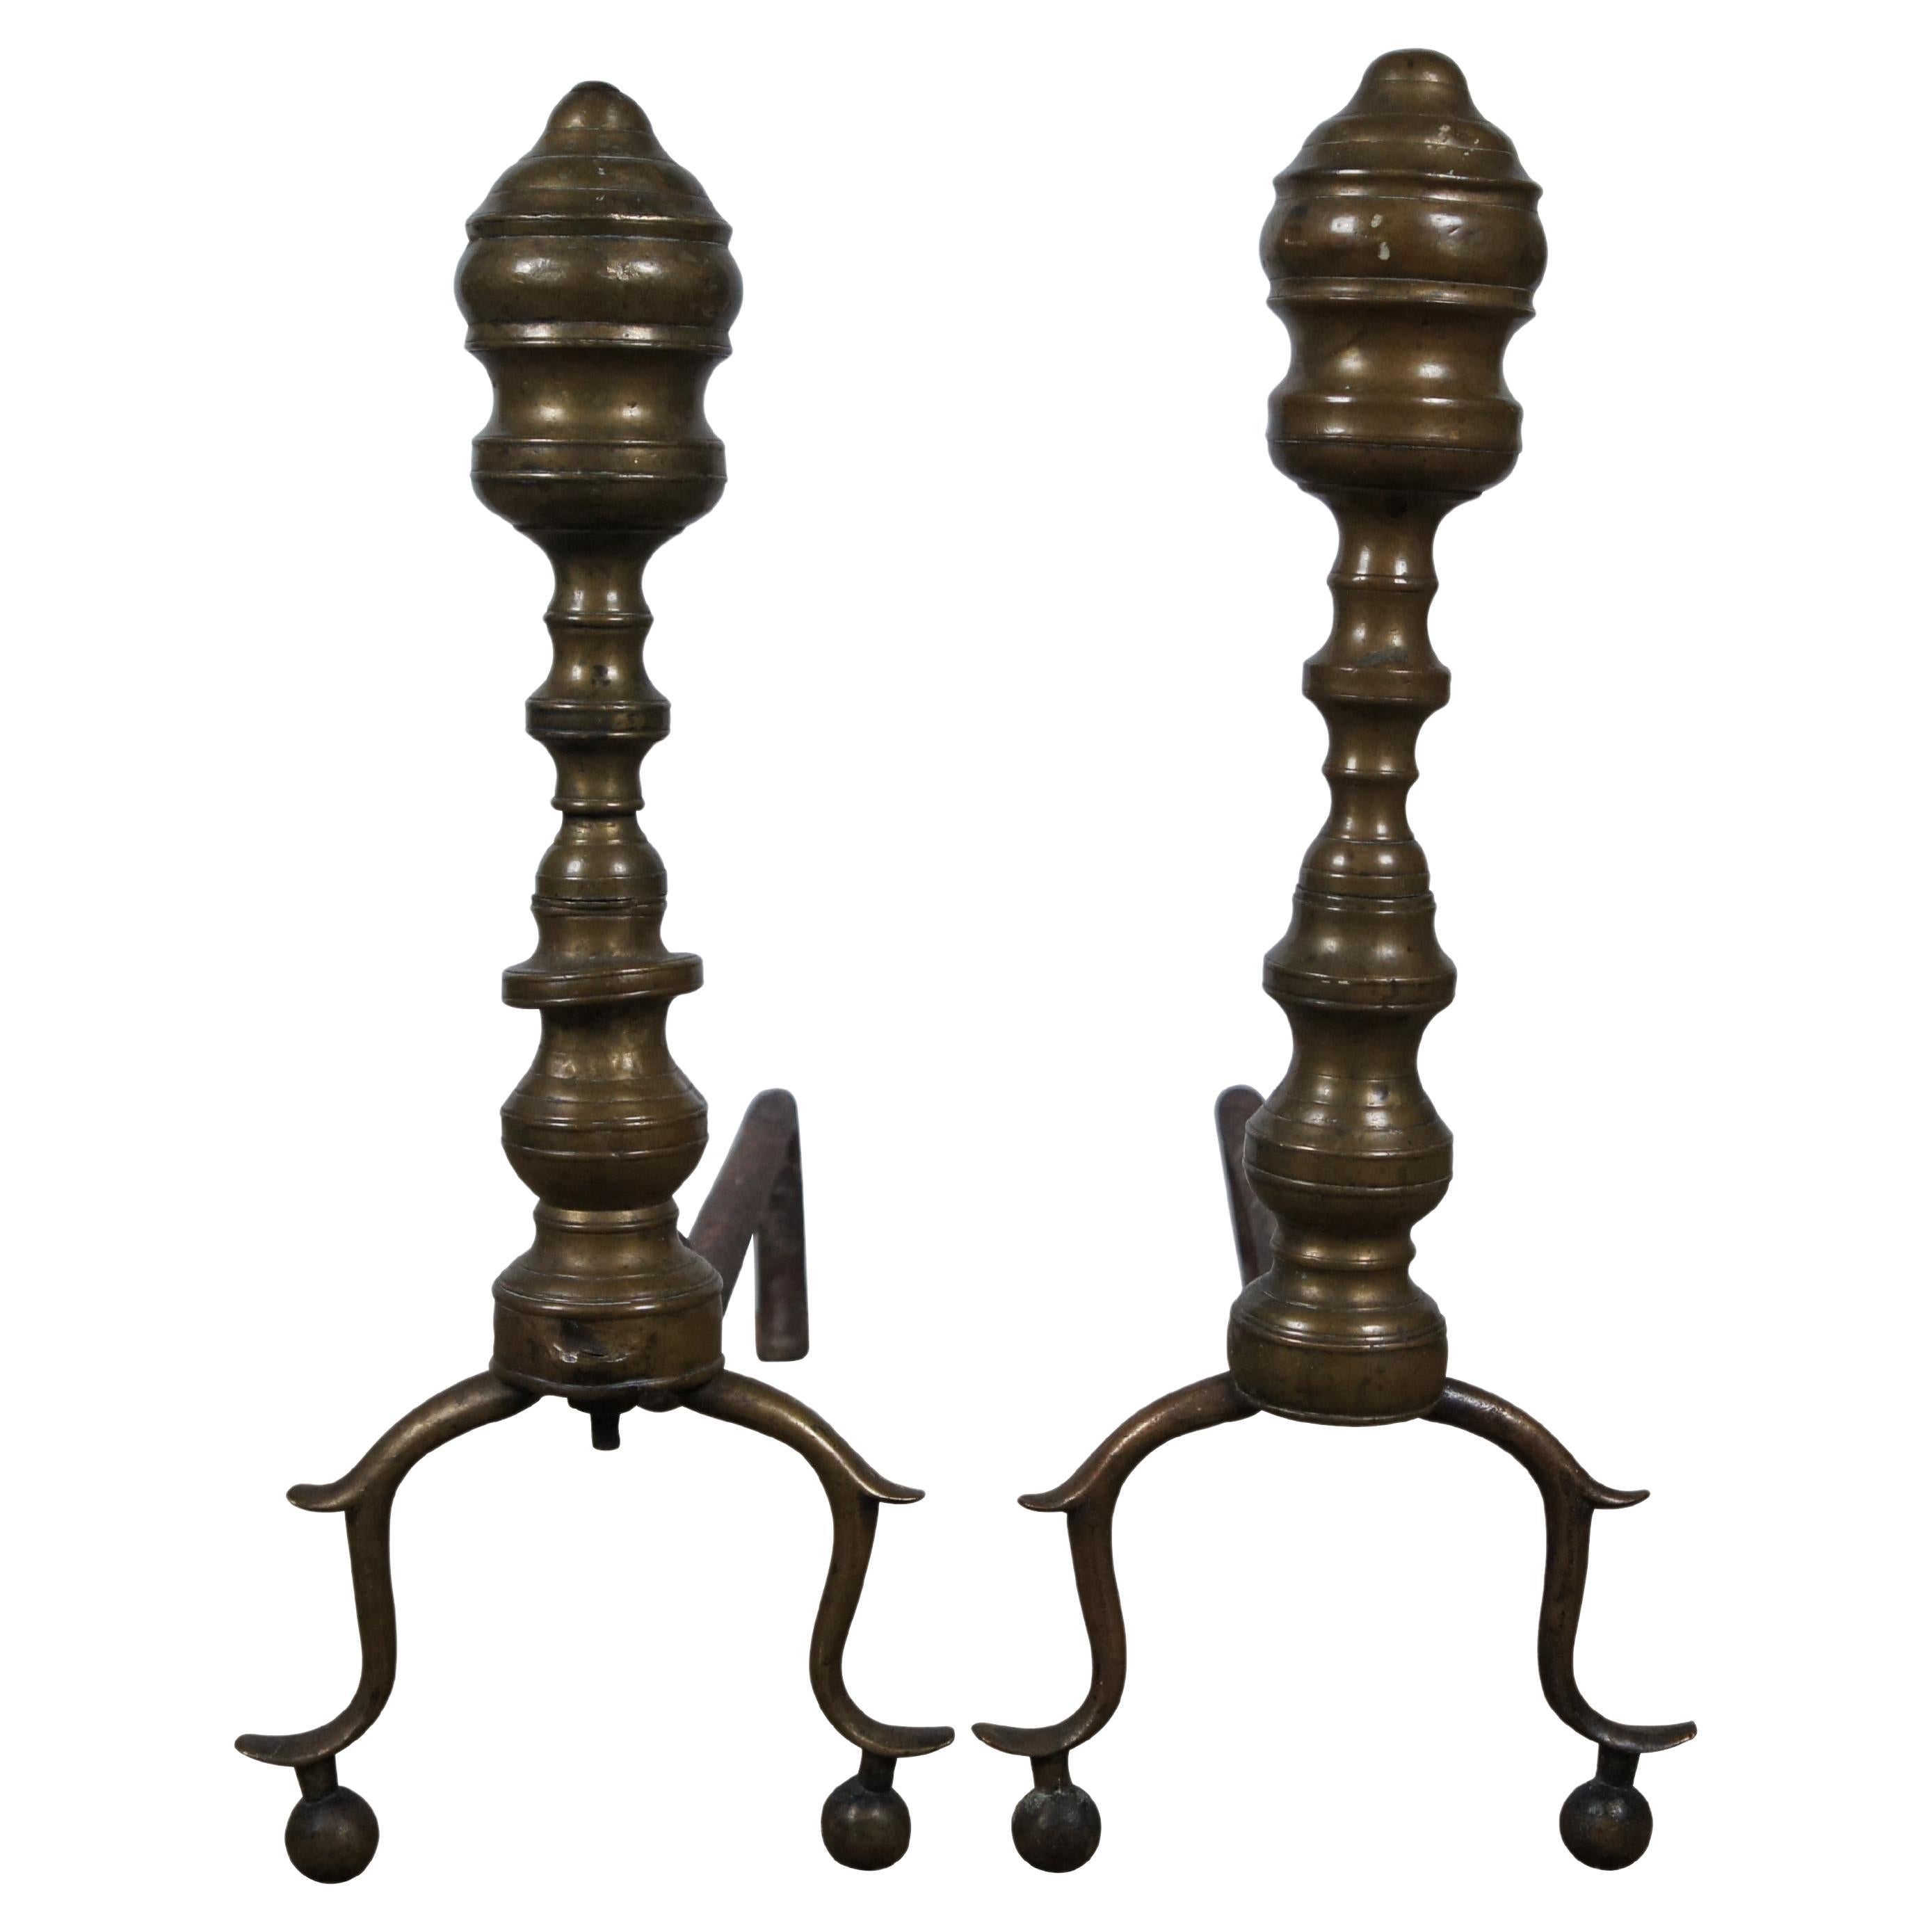 Antique Georgian Colonial Revival Brass Beehive Fireplace Andirons Firedogs 17" For Sale